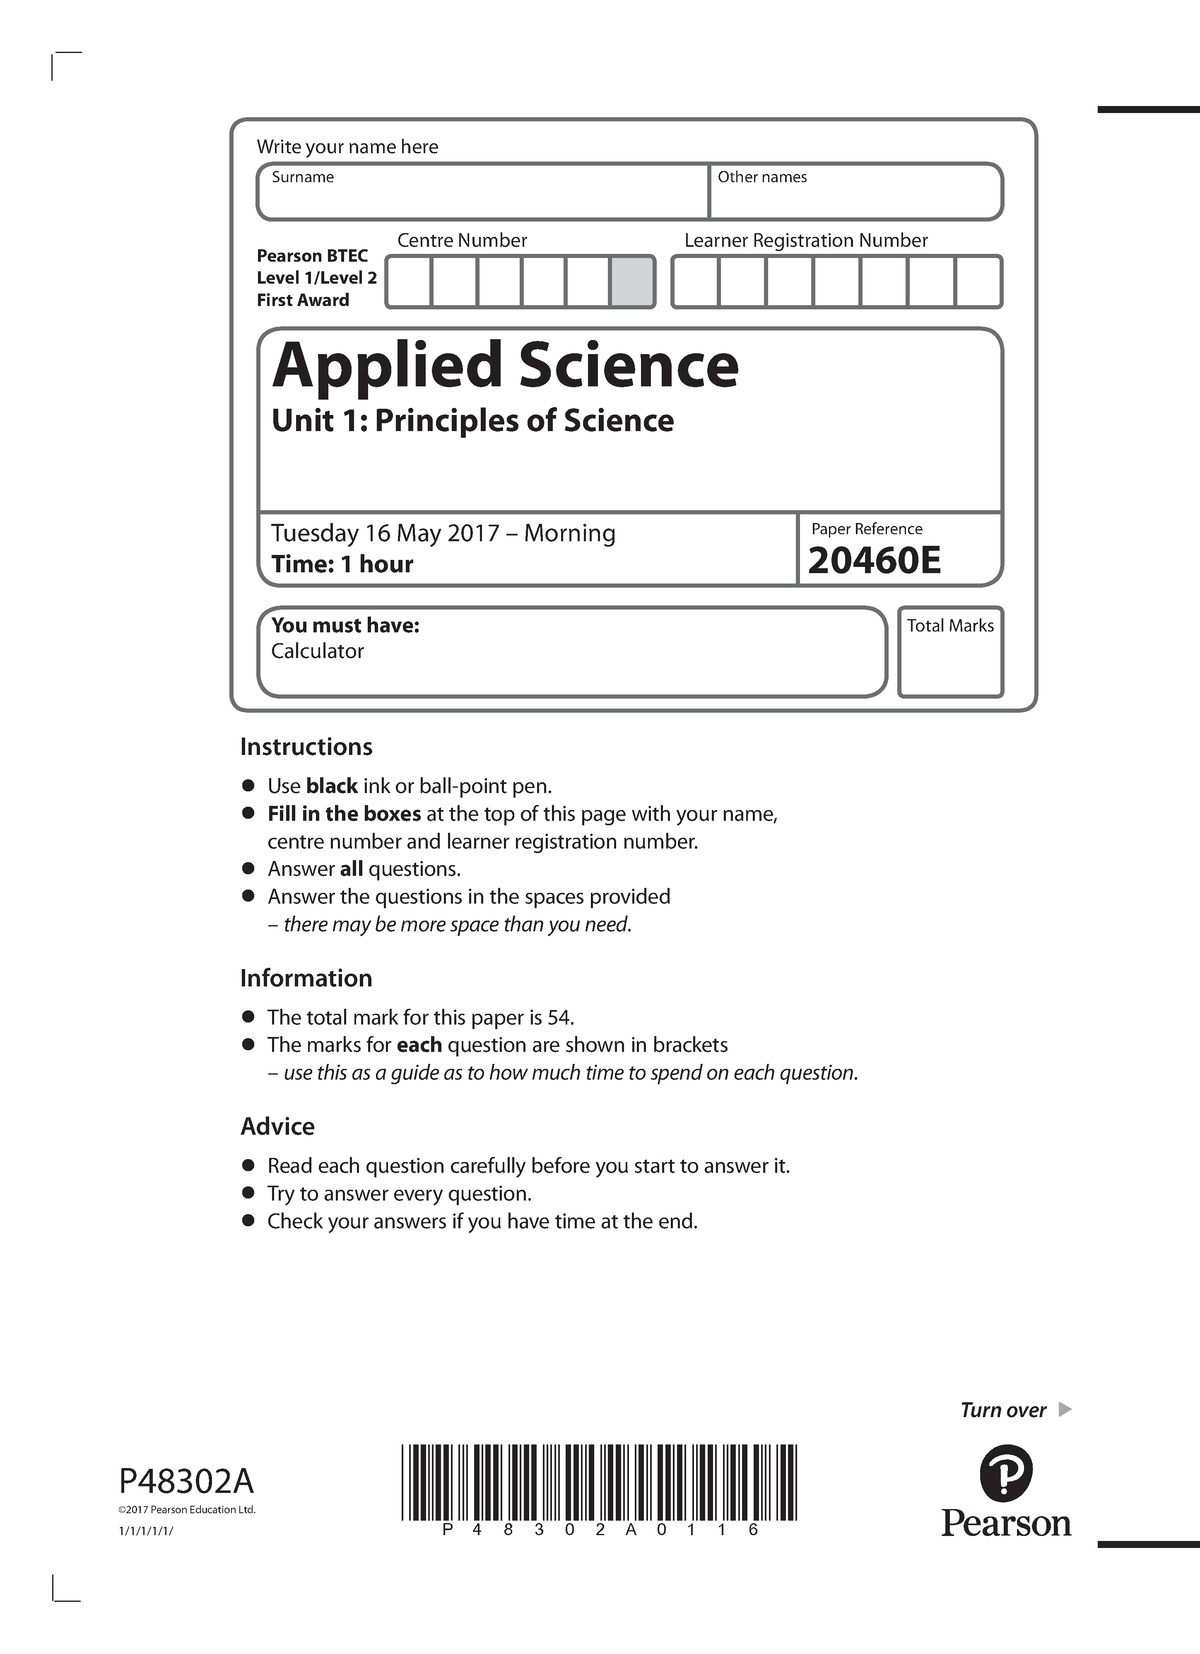 btec applied science past papers unit 1